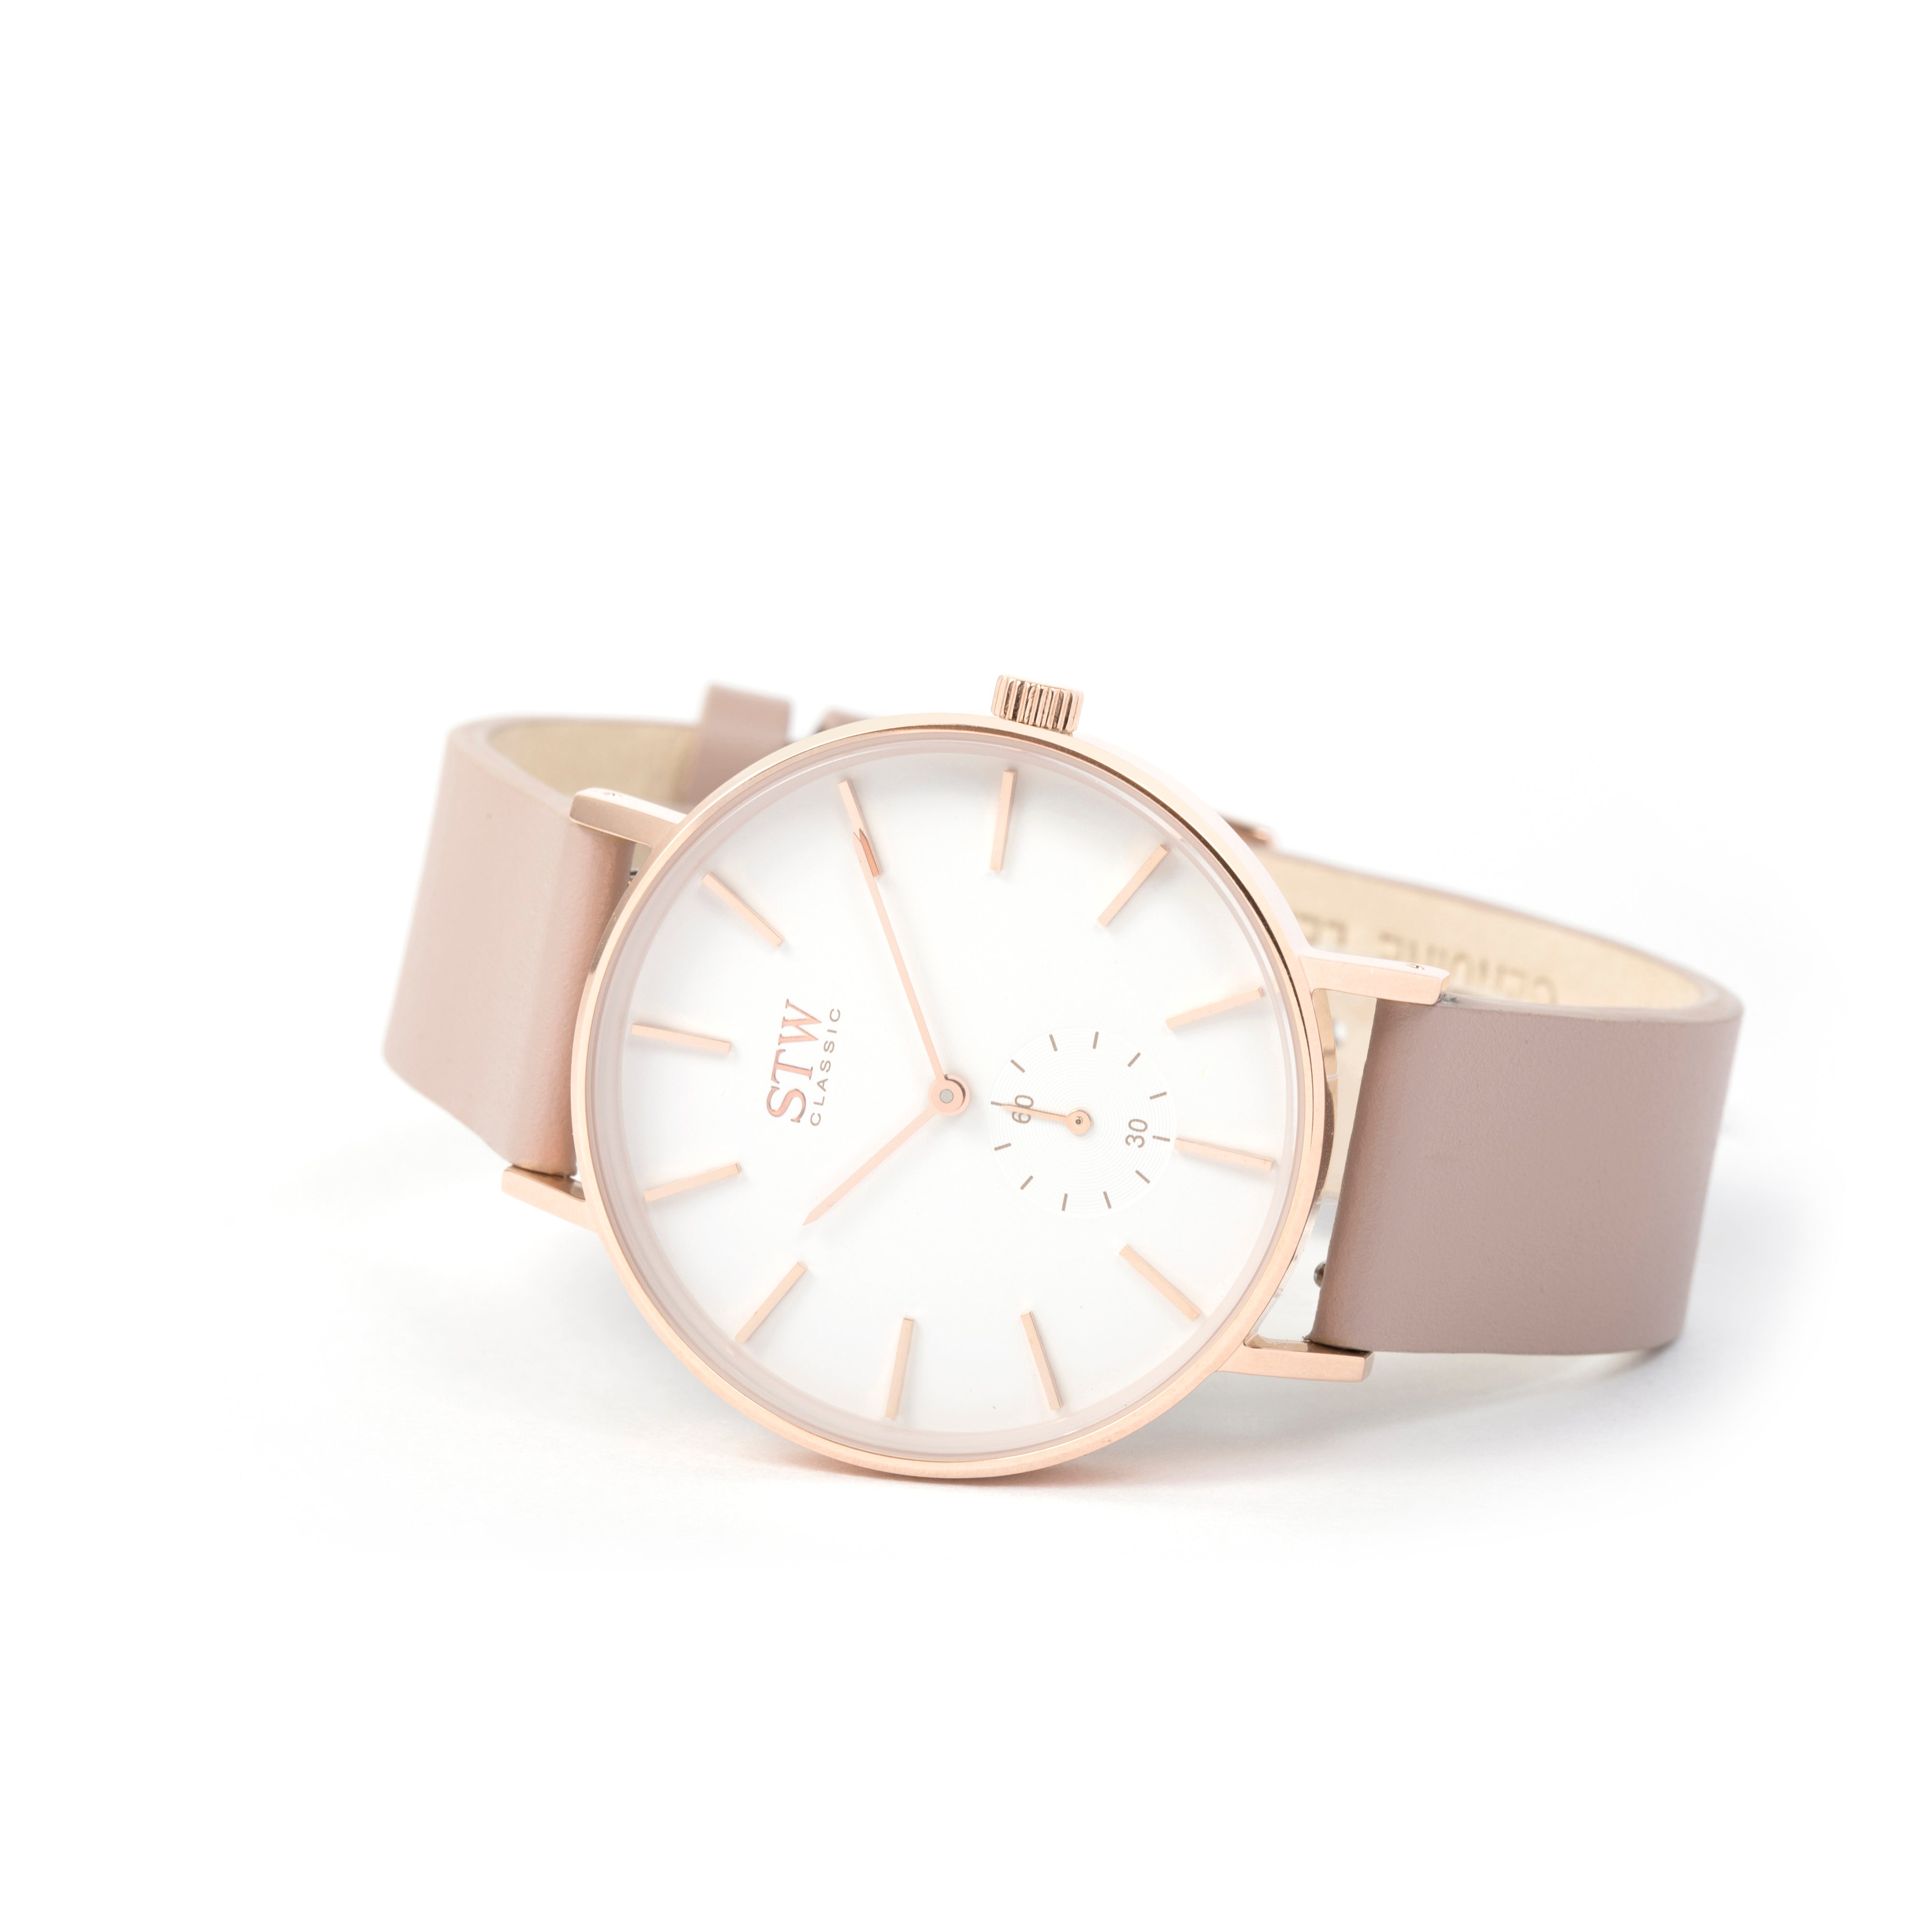 THE CLASSIC -  WHITE DIAL WITH PINK LEATHER STRAP WATCH